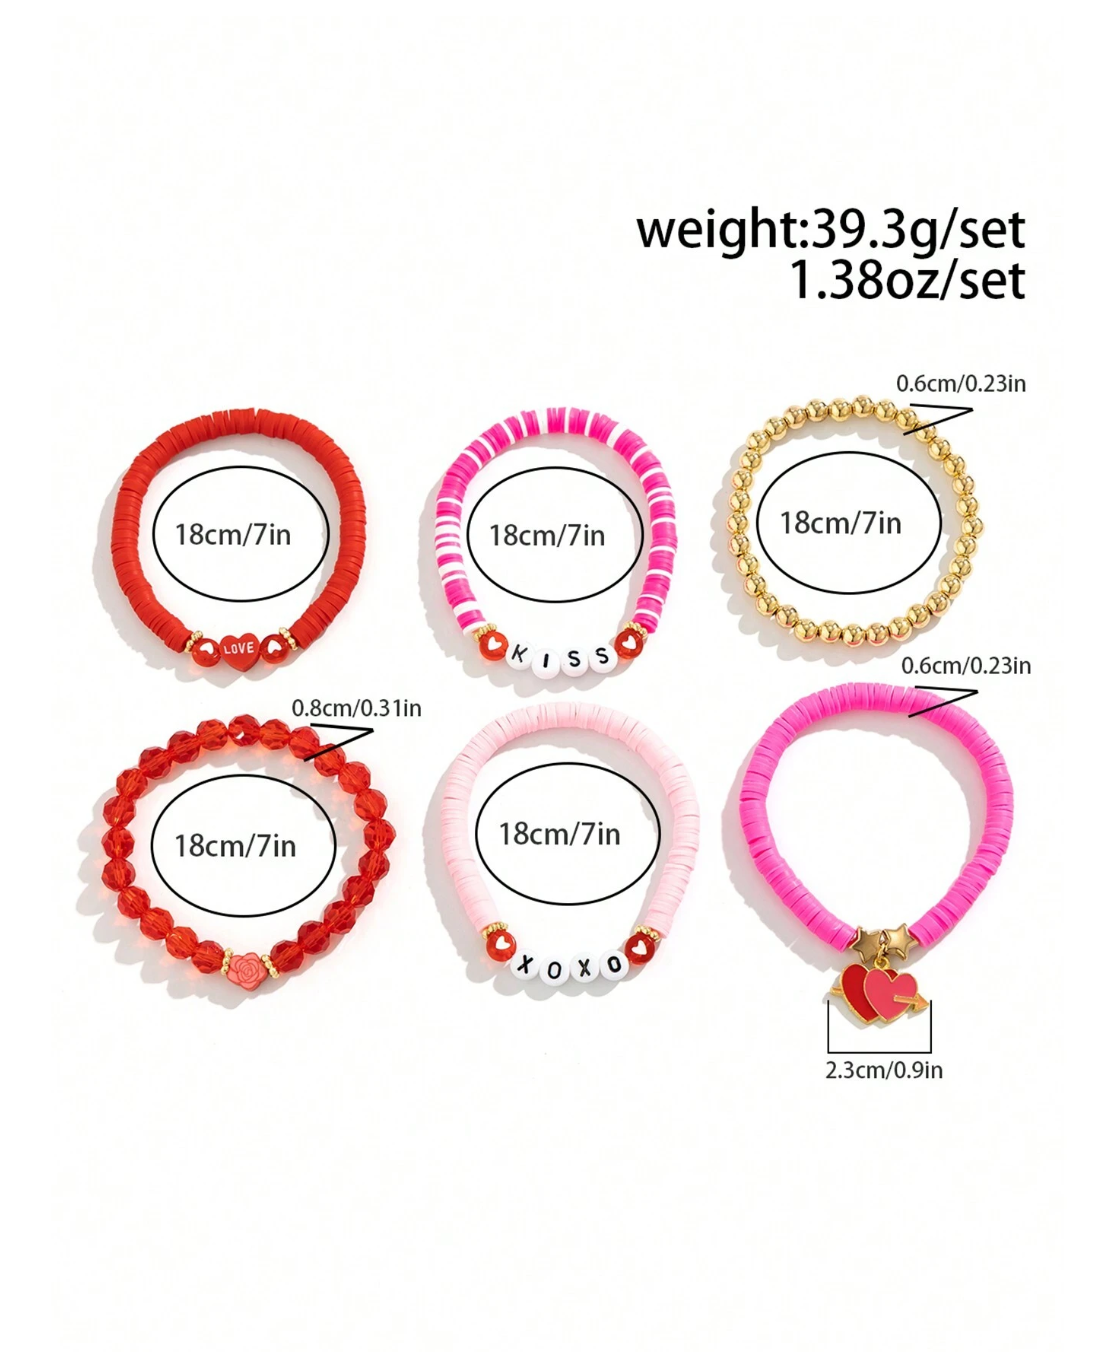 Charmingly Yours: ROMWE's 7pcs Kawaii Set - Sweet Hearts & Beaded Bliss for Daily Chic and Special Occasions!